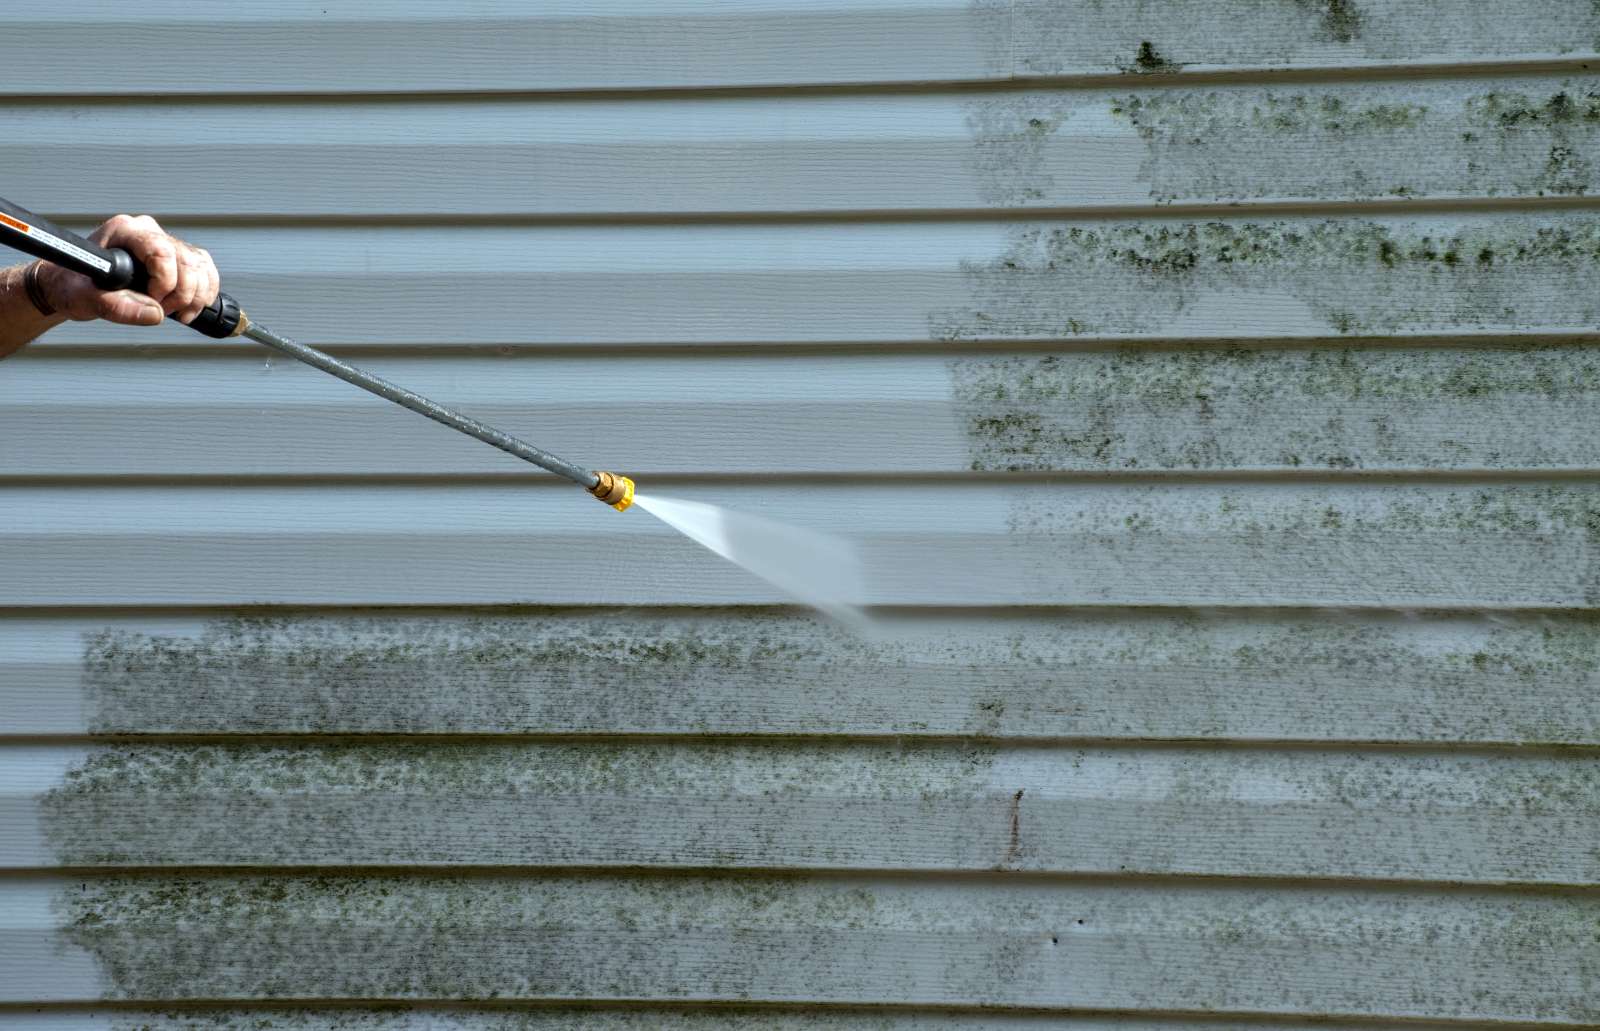 A pressure washing nozzle spraying water at a home's siding, half of which is clean while the other half is dirty.